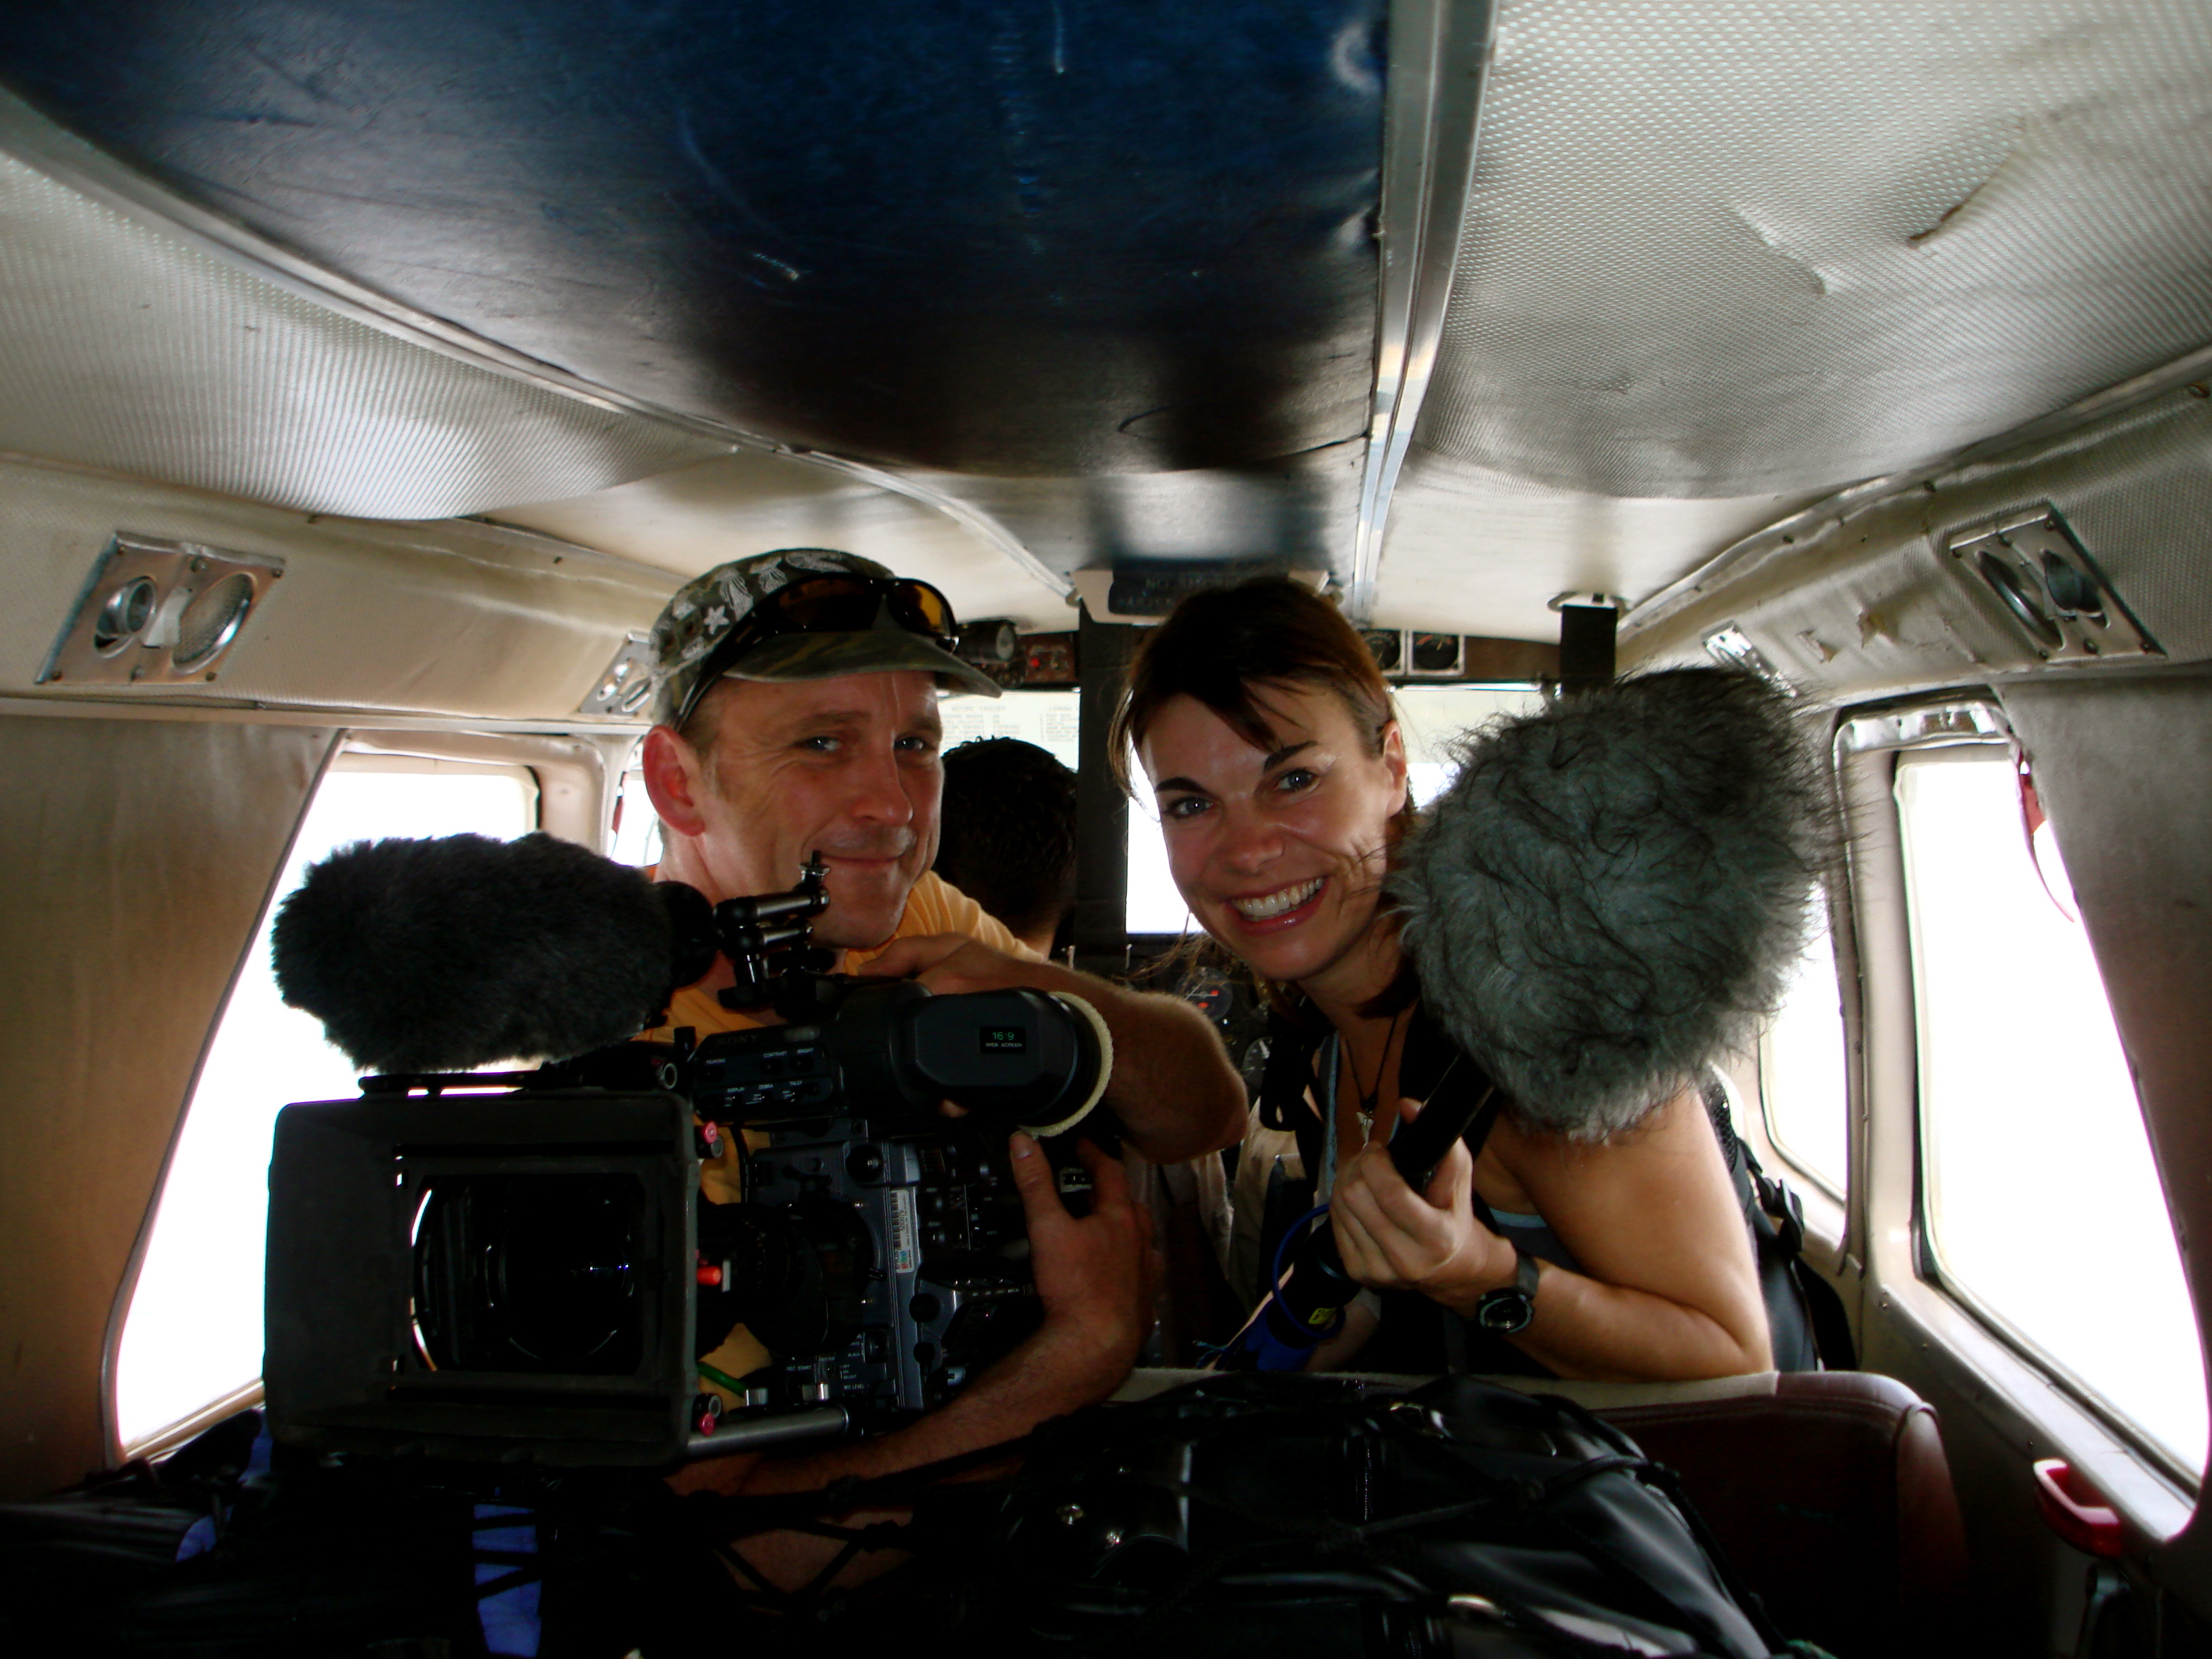 Melanie and cameraman Max on a plane into the Amazon jungle in 2007 to film documentary, 'Tribal Wives' for the BBC.